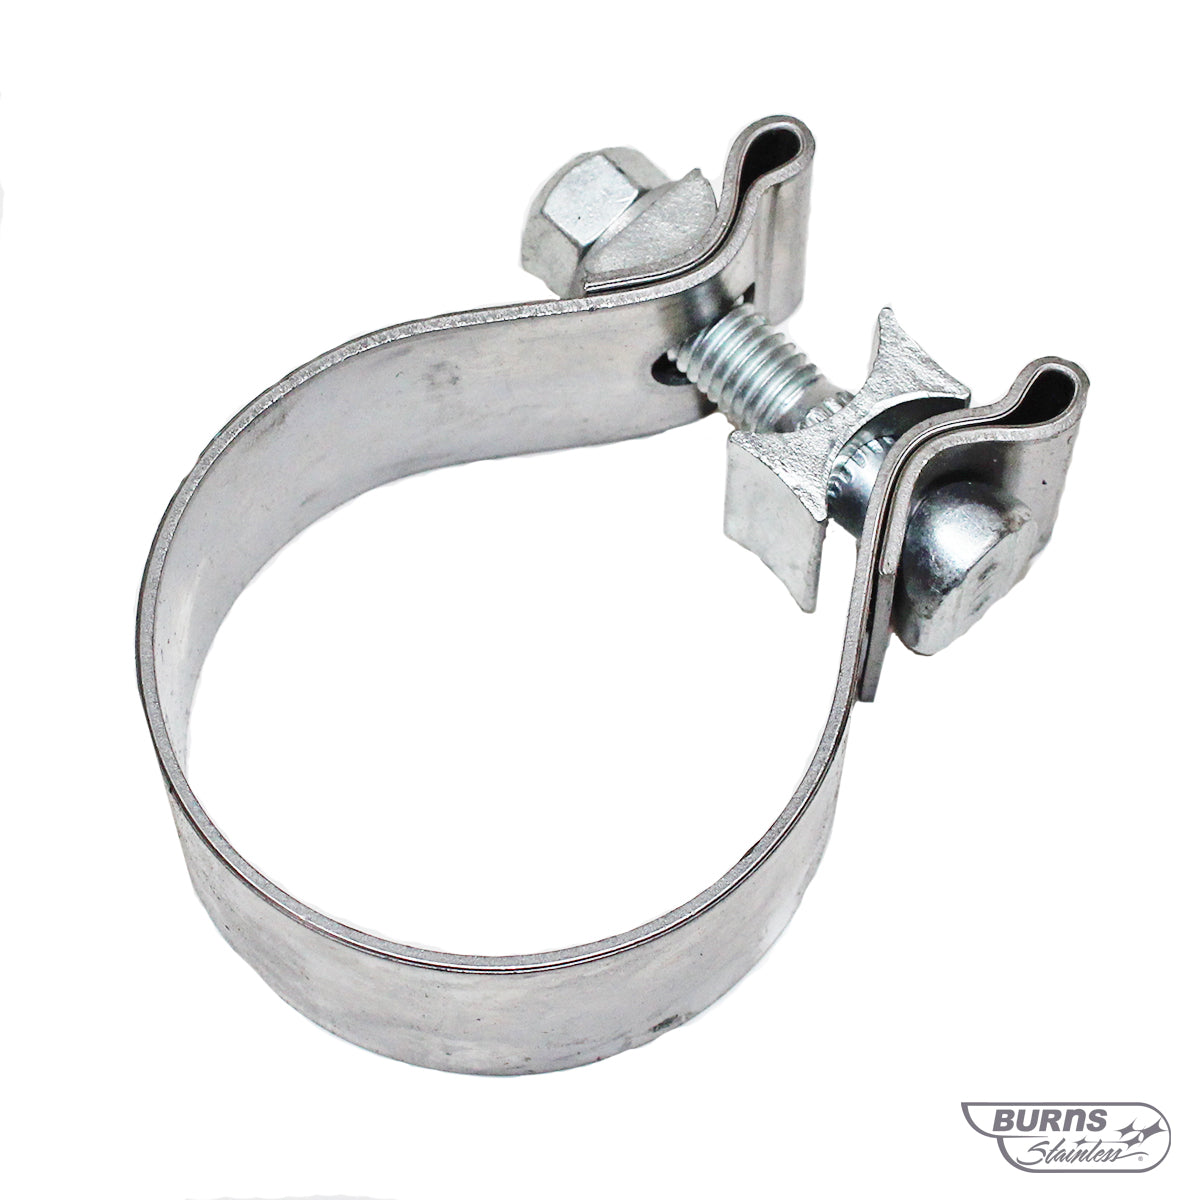 torca band clamps